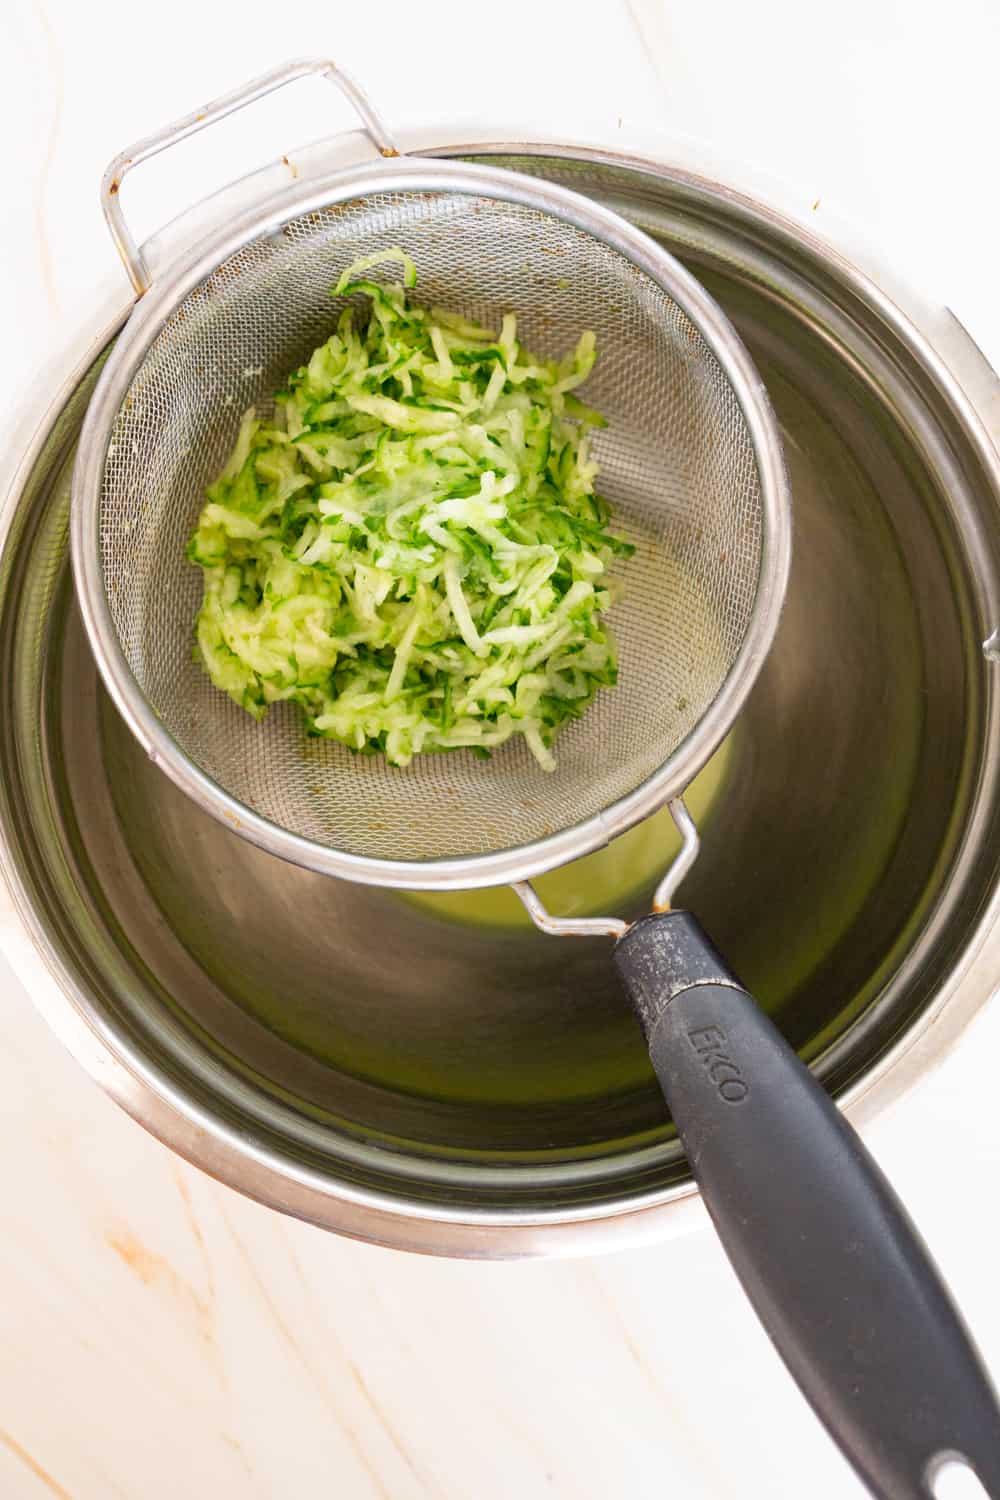 grated cucumber in a colander over a bowl